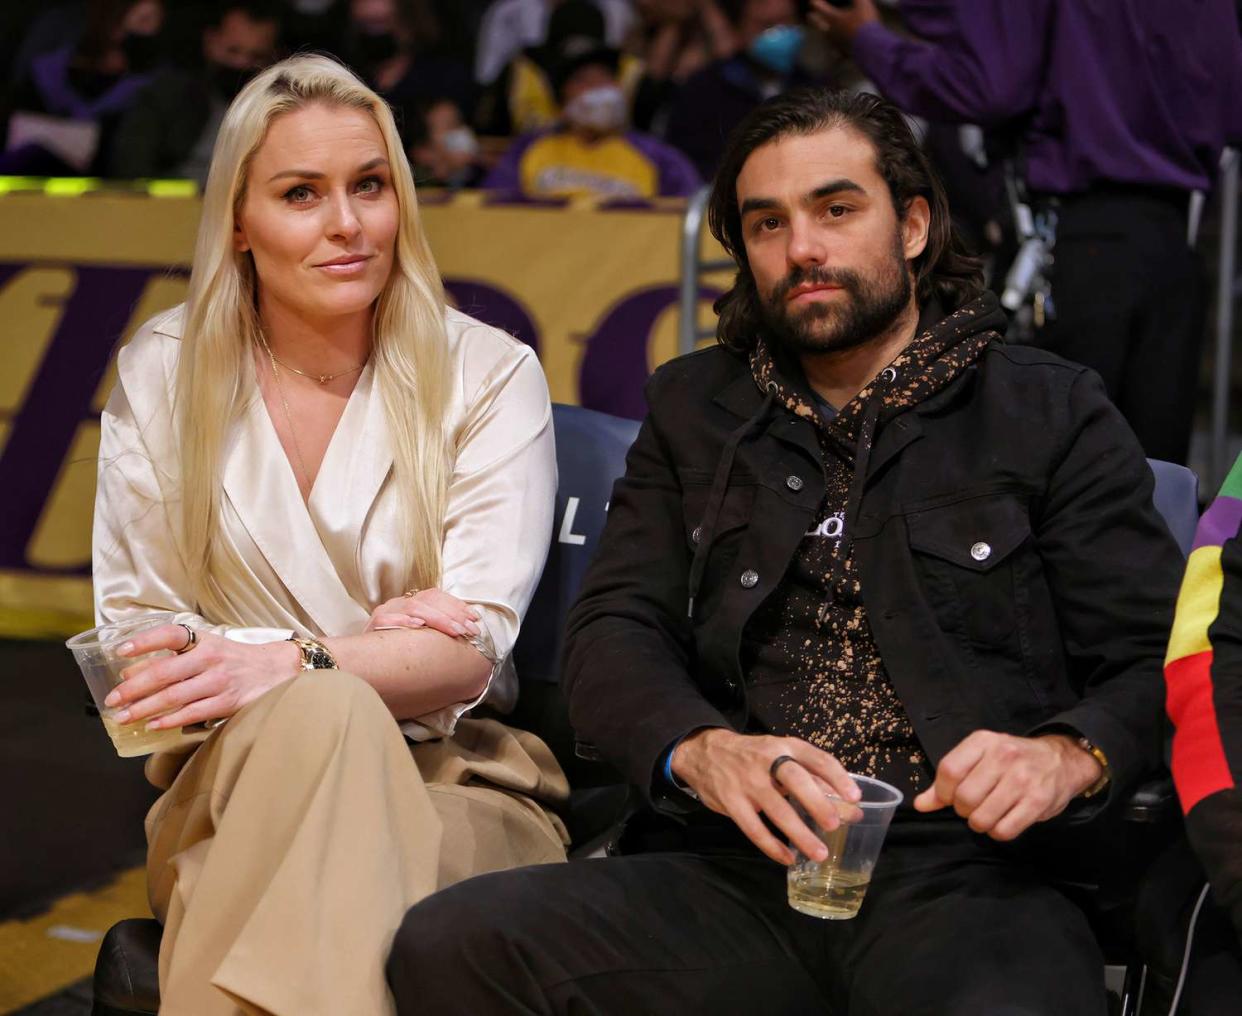 Lindsey Vonn and Actor, Diego Osorio attend a game between the Indiana Pacers and Los Angeles Lakers on January 19, 2022 at Crypto.Com Arena in Los Angeles, California. NOTE TO USER: User expressly acknowledges and agrees that, by downloading and/or using this Photograph, user is consenting to the terms and conditions of the Getty Images License Agreement. Mandatory Copyright Notice: Copyright 2022 NBAE